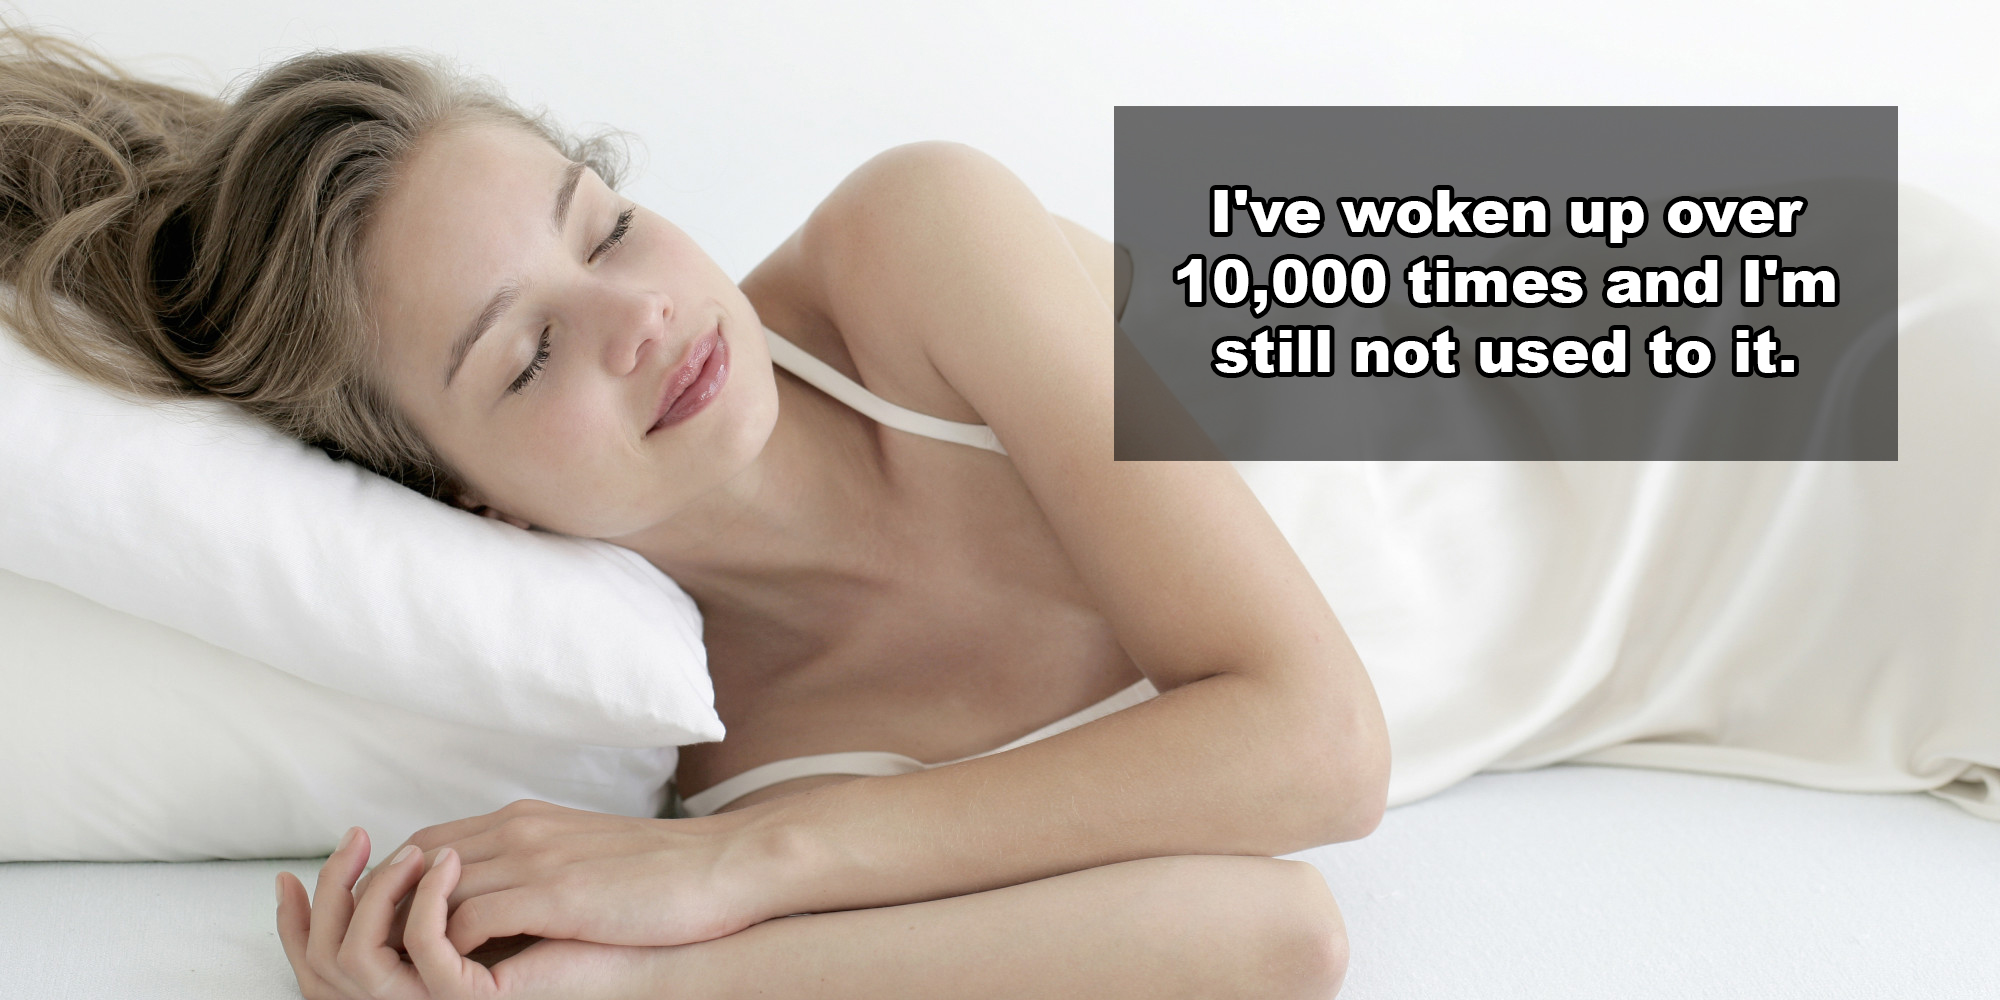 20 Shower Thoughts That Will Fry Your Circuits